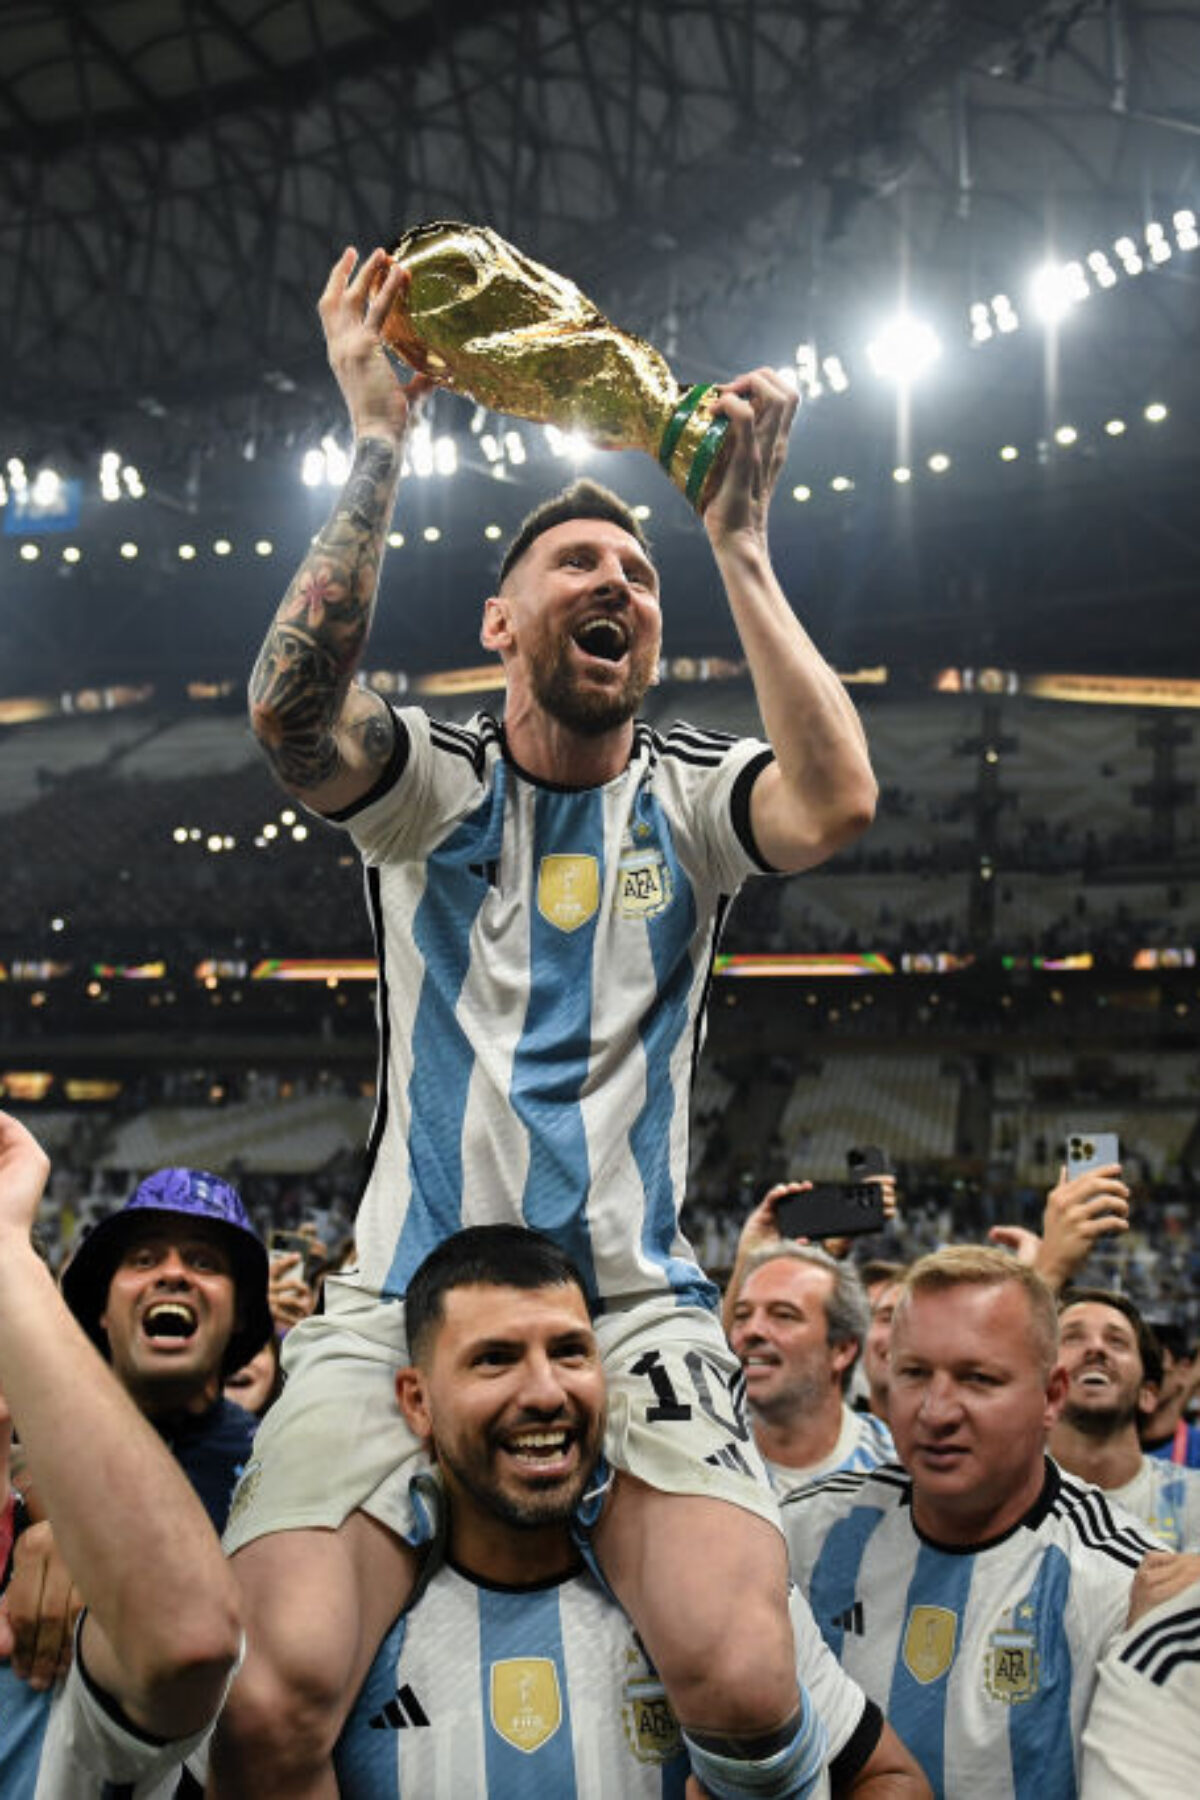 LUSAIL CITY, QATAR - DECEMBER 18: Lionel Messi of Argentina celebrates with the FIFA World Cup Qatar 2022 Winner's Trophy on Sergio 'Kun' Aguero's shoulders after the team's victory during the FIFA World Cup Qatar 2022 Final match between Argentina and France at Lusail Stadium on December 18, 2022 in Lusail City, Qatar. (Photo by David Ramos - FIFA/FIFA via Getty Images)